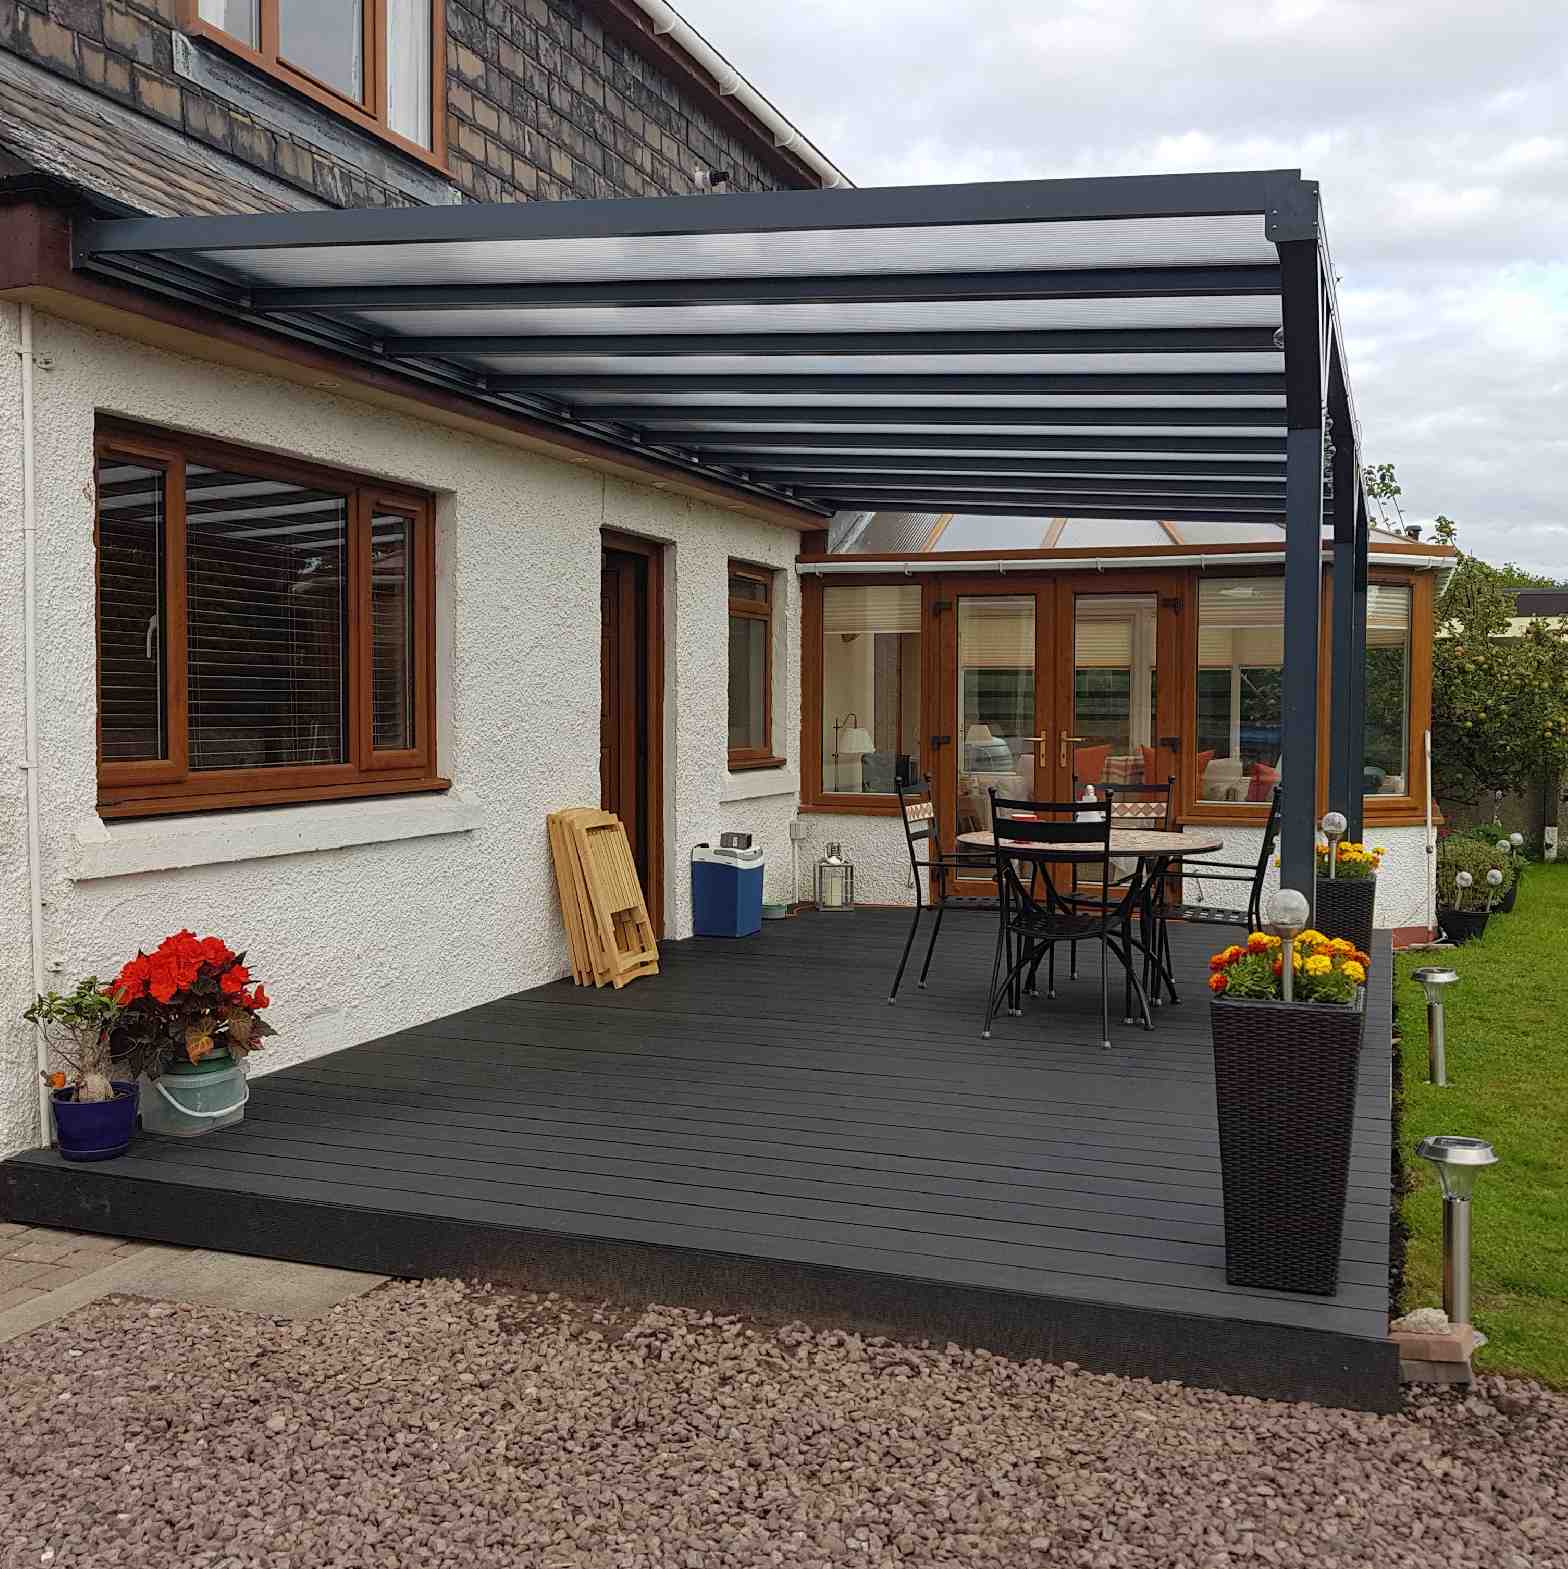 Buy Omega Verandah, Anthracite Grey, 16mm Polycarbonate Glazing - 10.2m (W) x 4.5m (P), (5) Supporting Posts online today